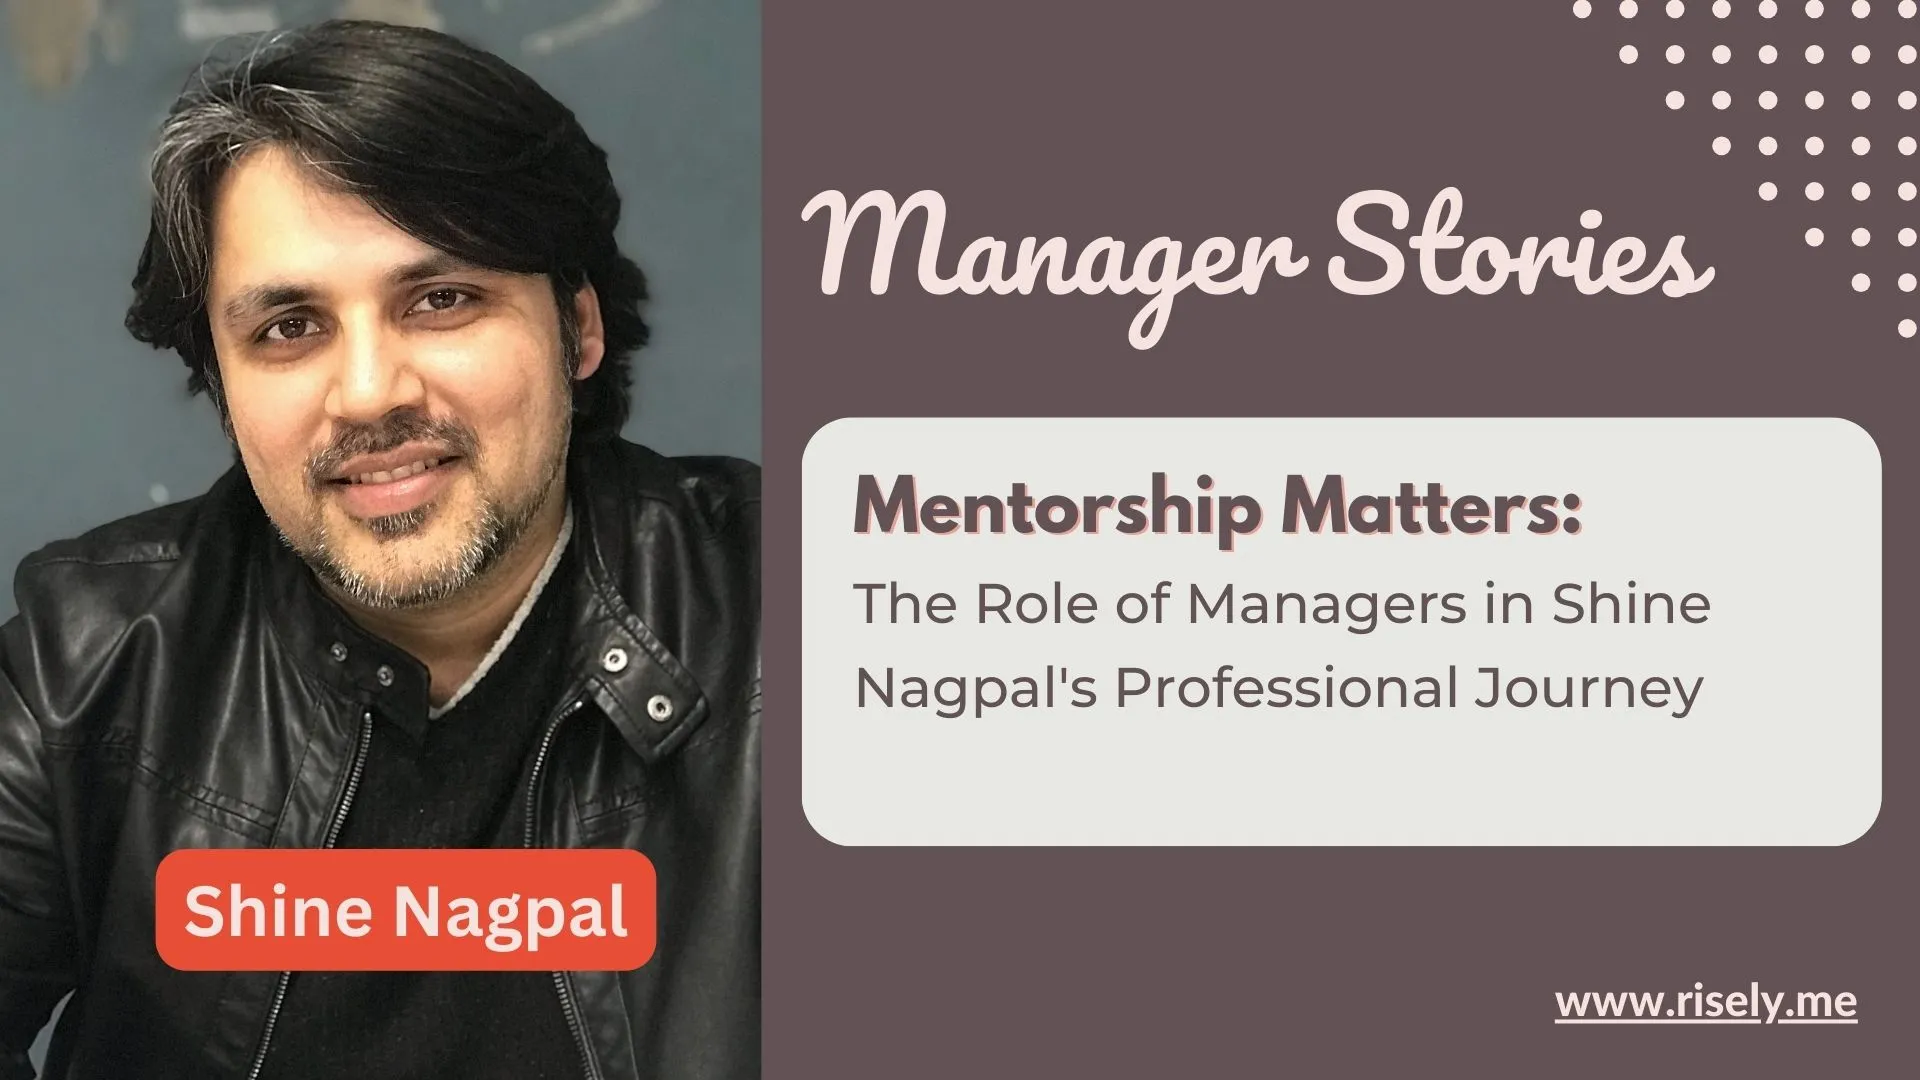 Mentorship Matters: The Role of Managers in Shine Nagpal's Professional Journey